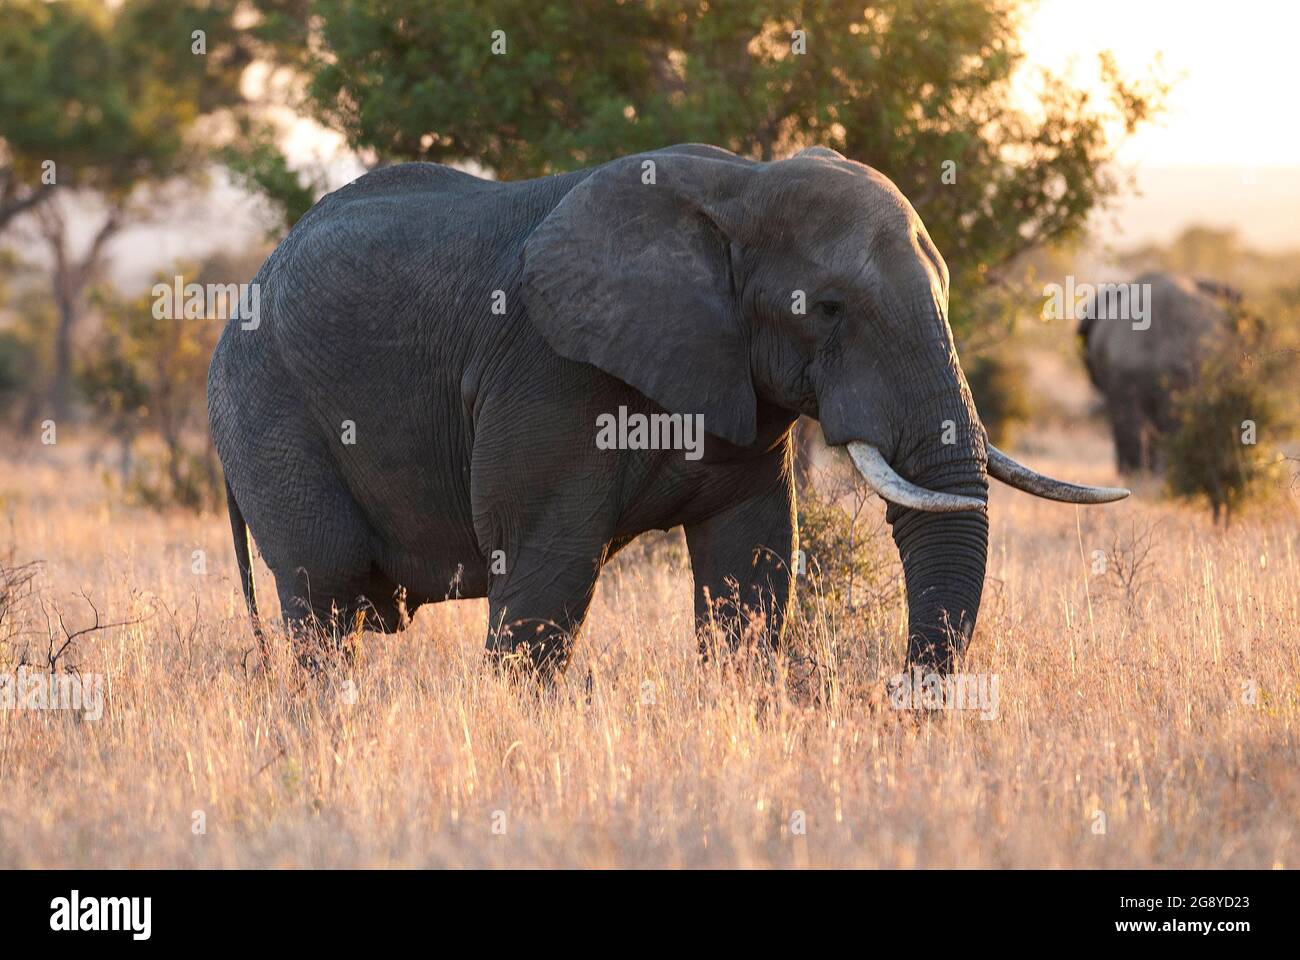 African elephant in African Savanna environment, Kruger National Park, South Africa. Stock Photo